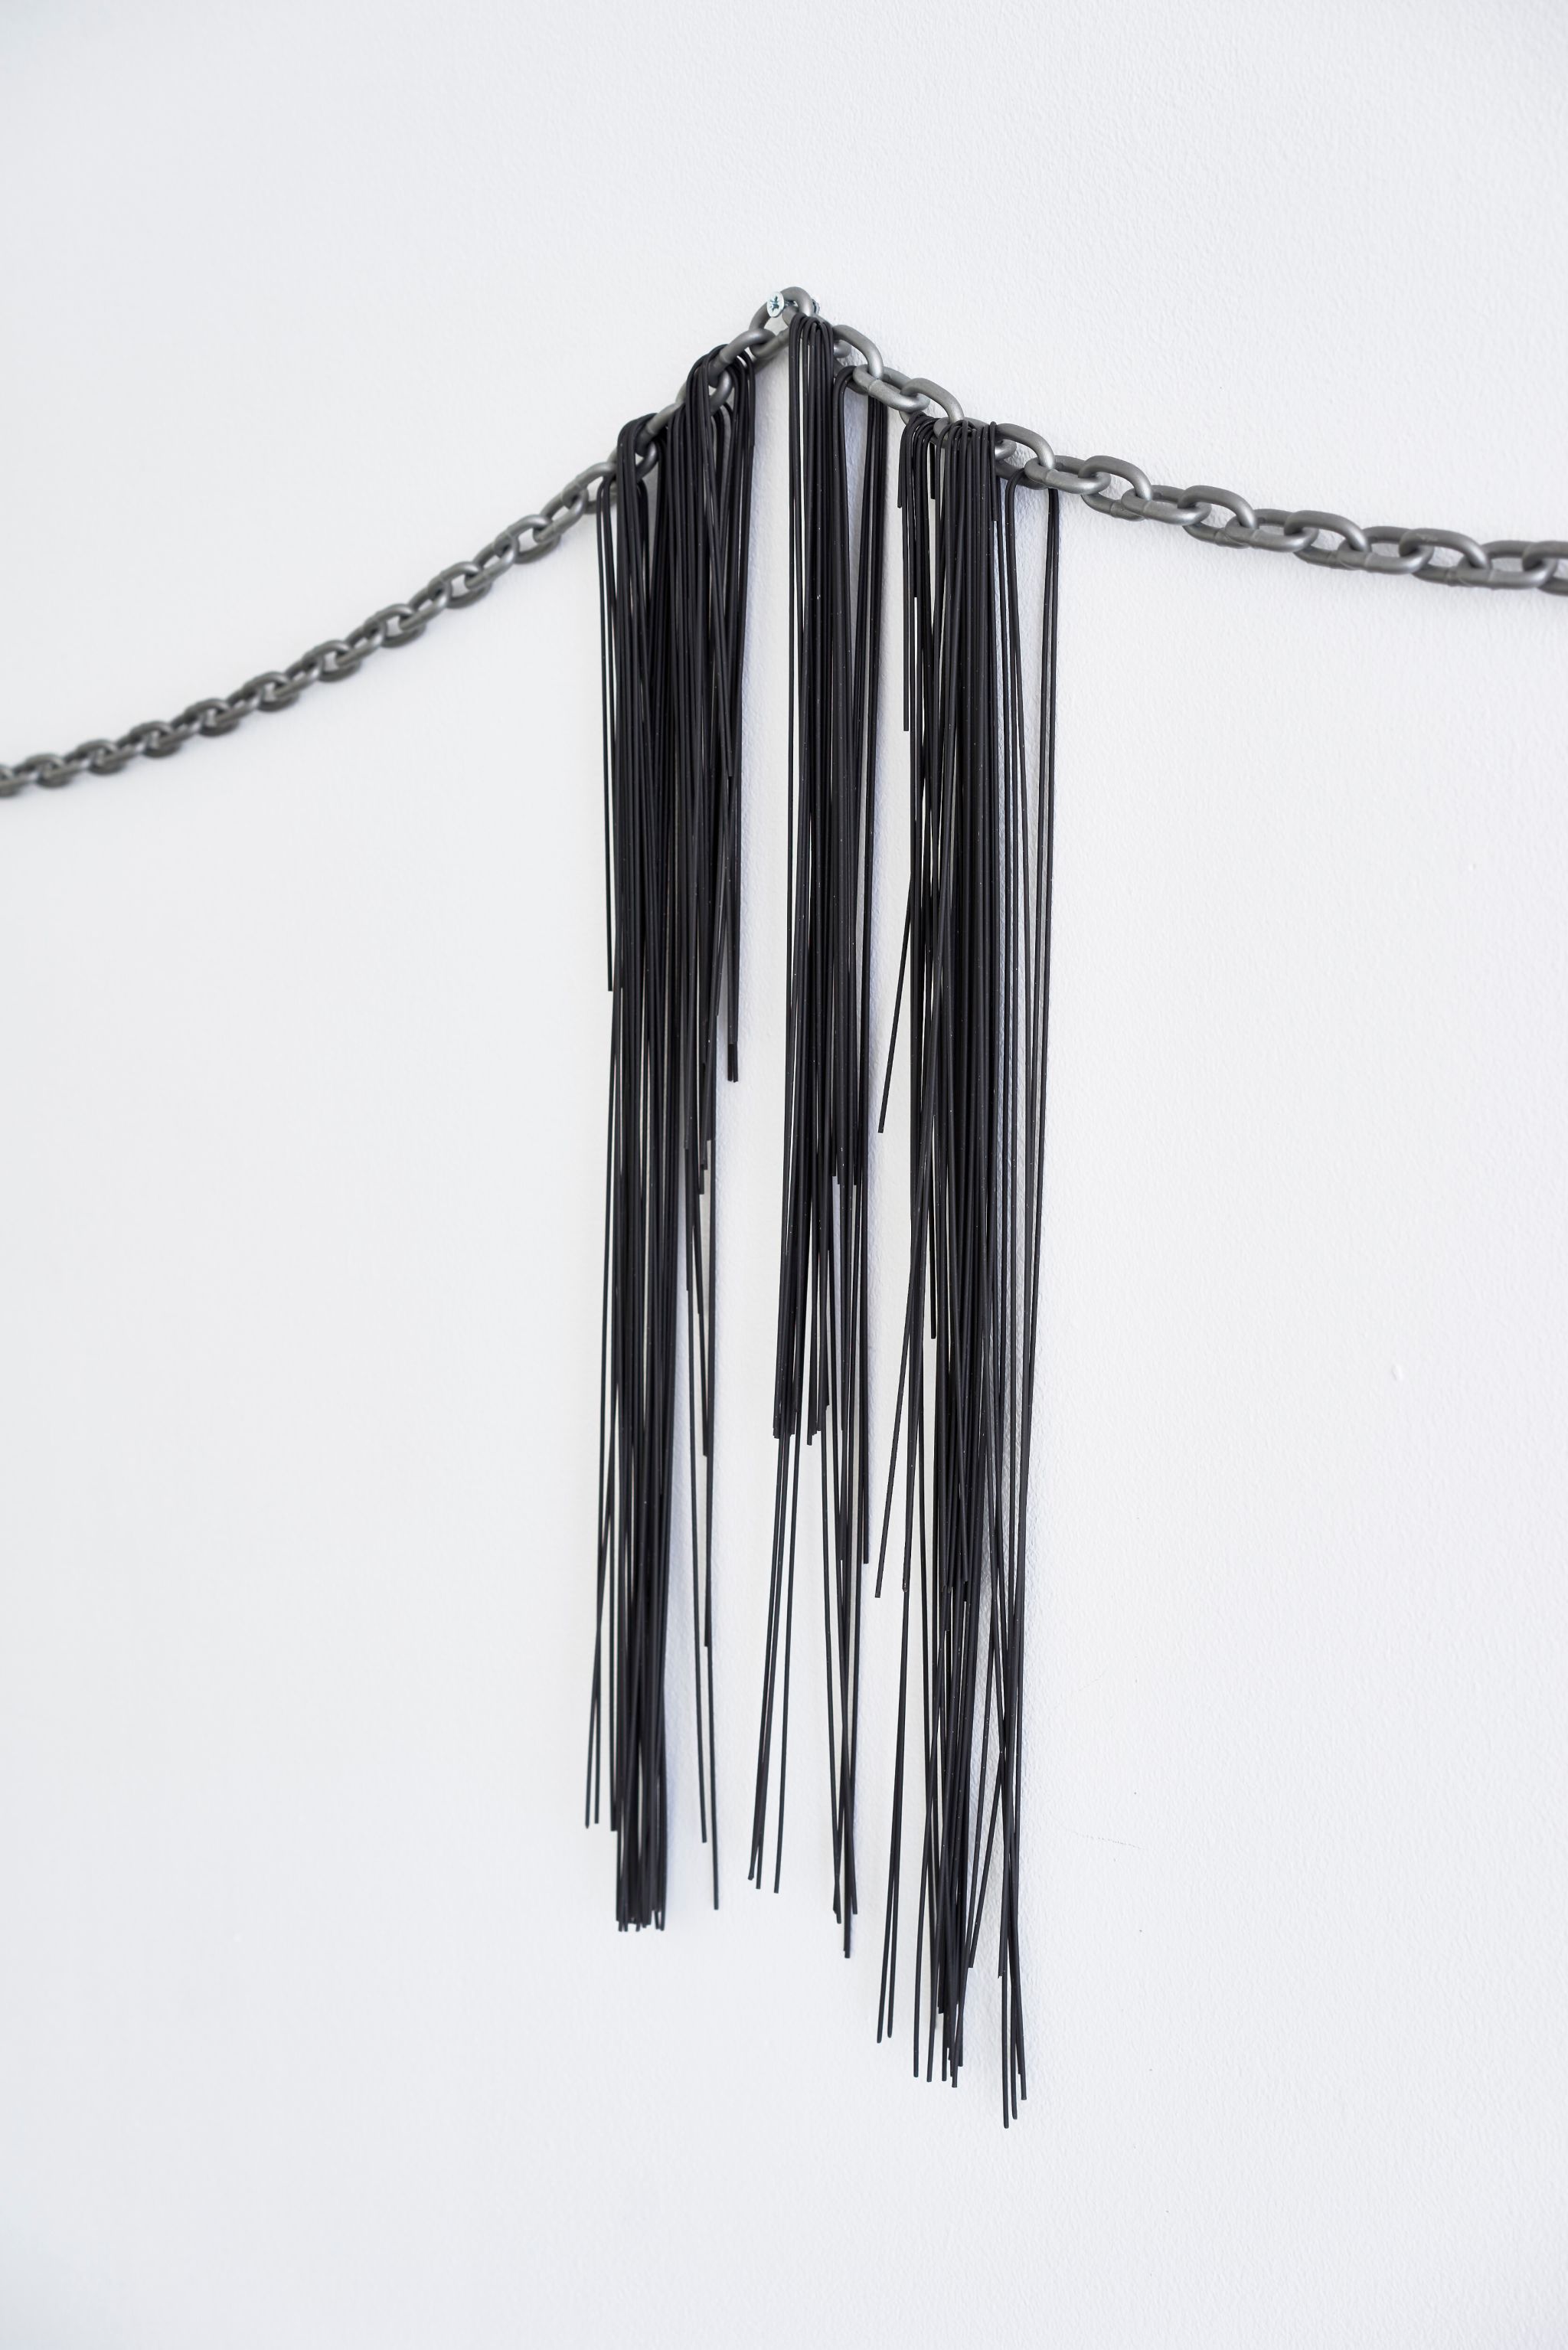 Davide Stucchi, Not much could be saved (detail), 2015, Iron chain, squid ink spaghetti, 69 ⁠× ⁠293 ⁠× ⁠2 ⁠⁠cm